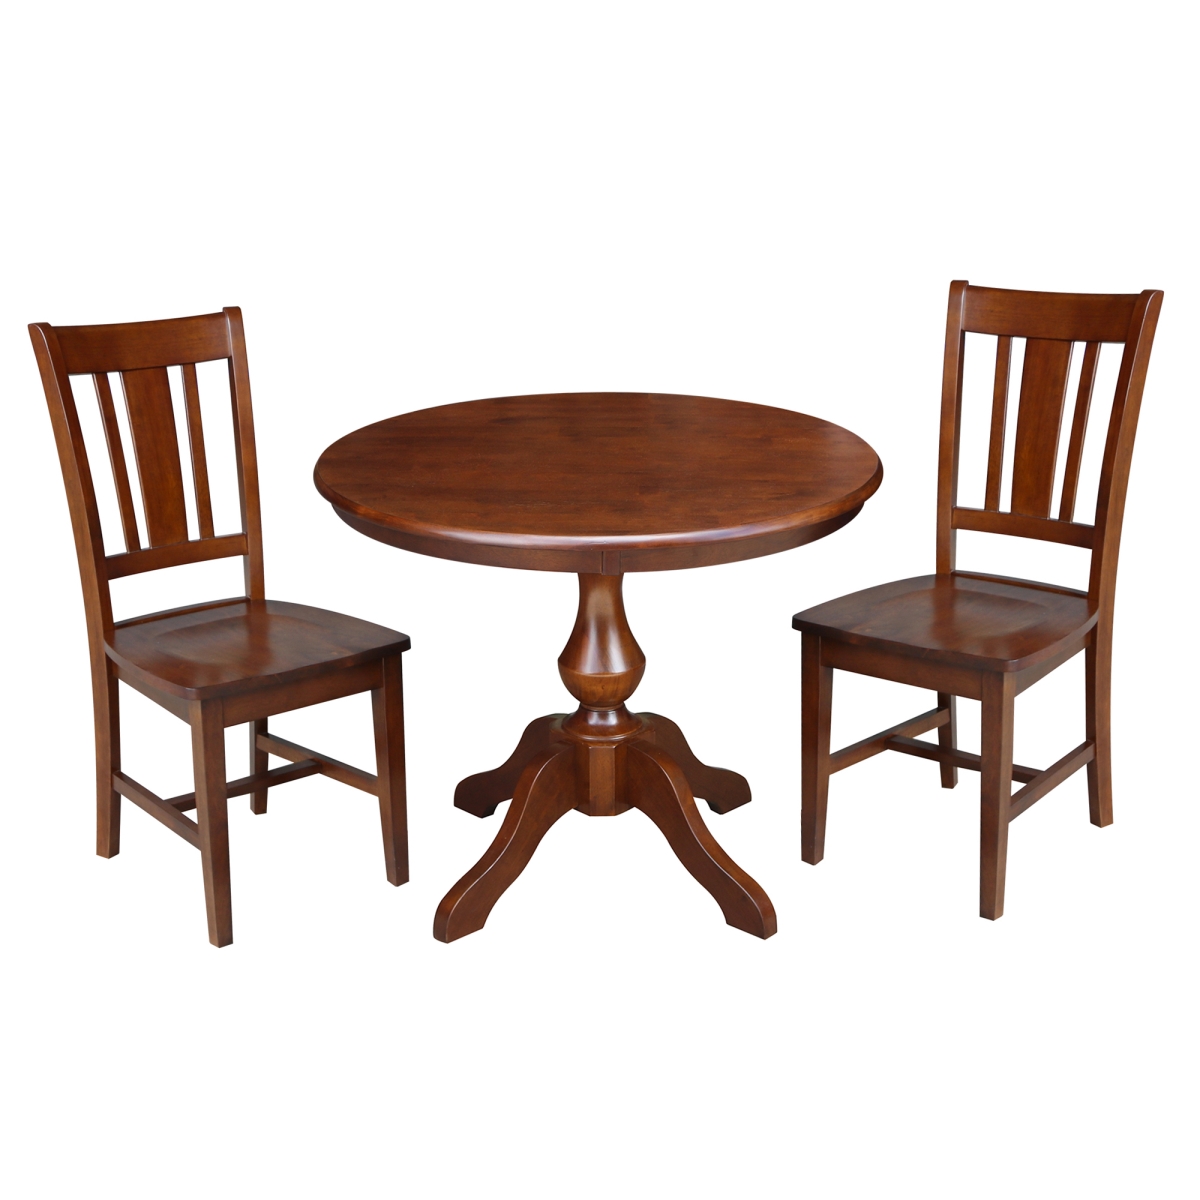 K581-36rt-11b-c10-2 36 In. Round Top Pedestal Table With 2 Chairs, Espresso - 3 Piece